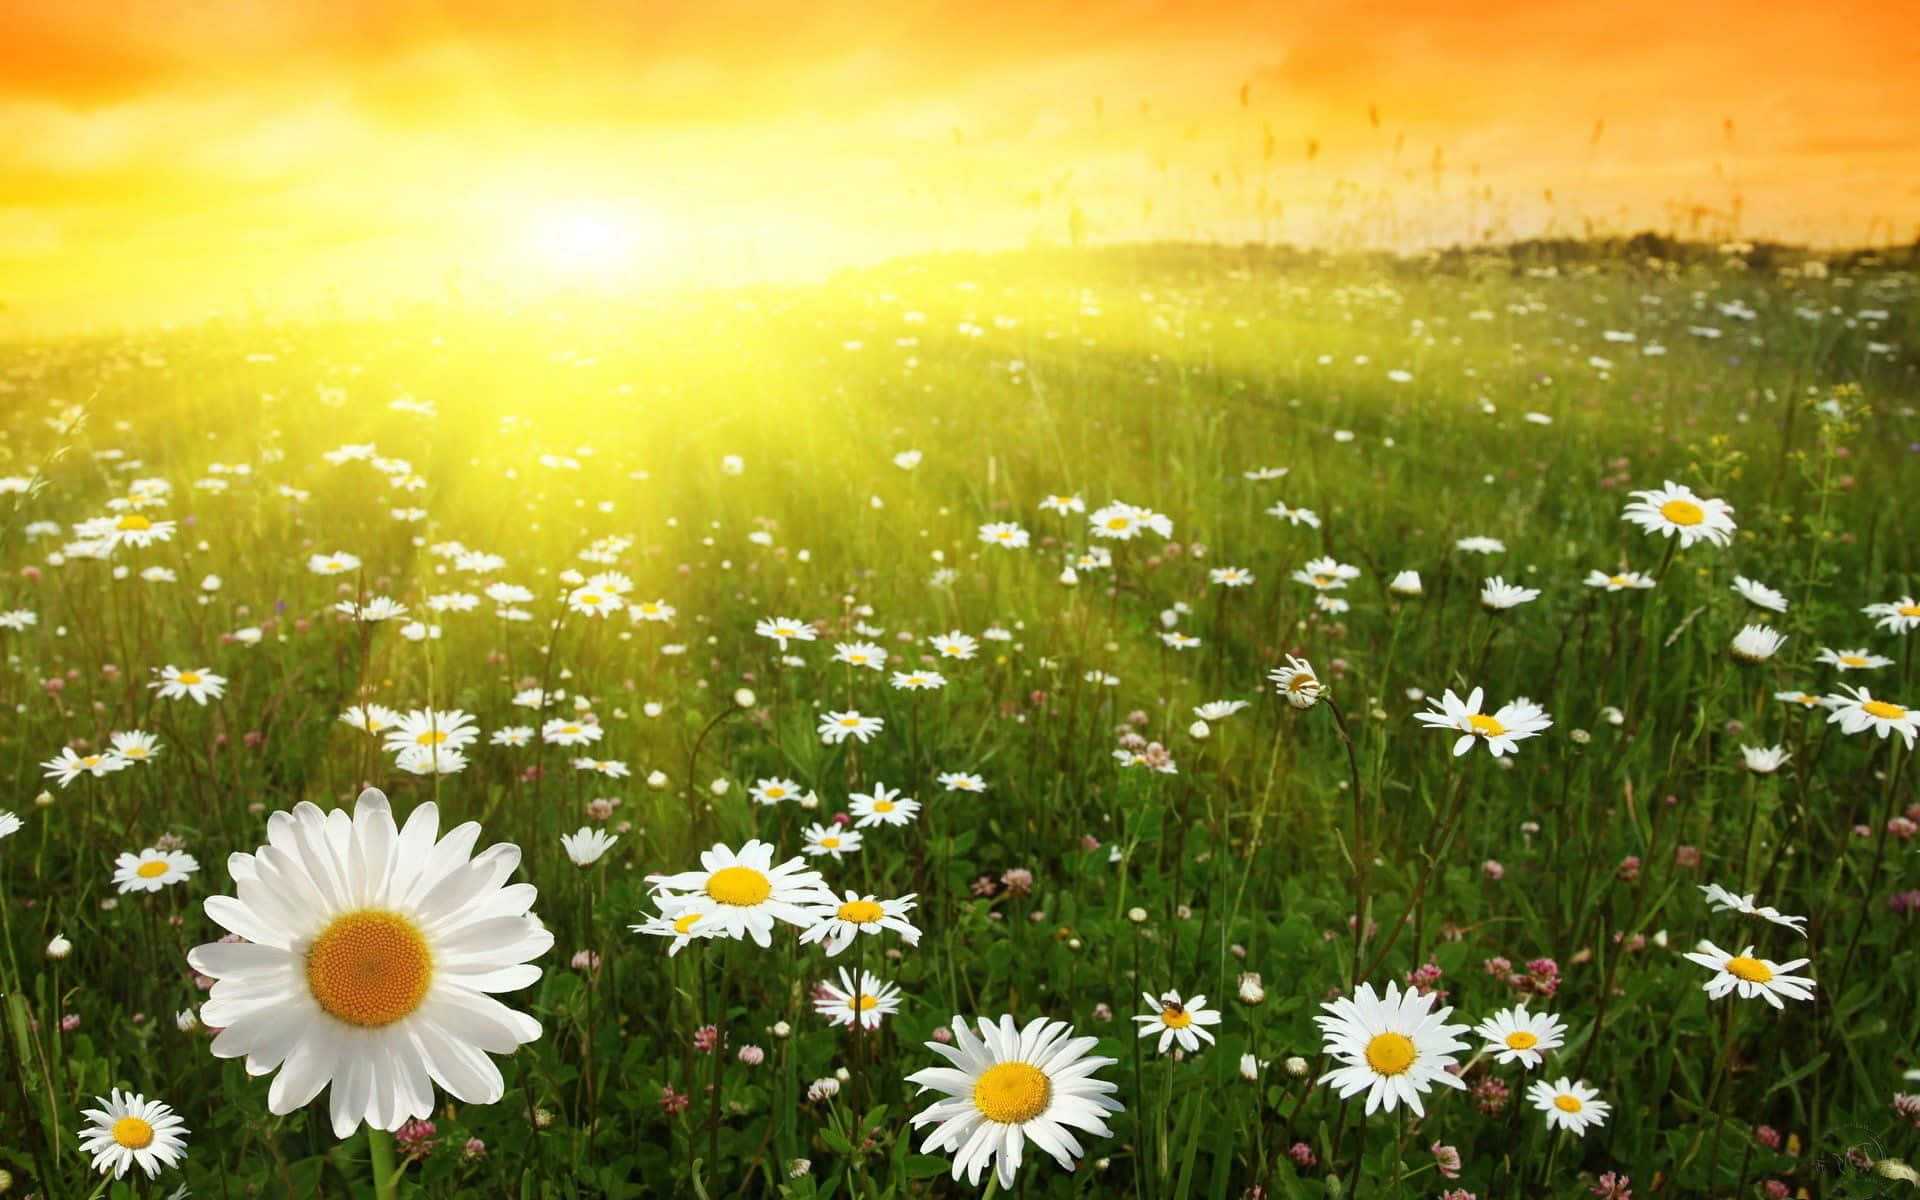 Daisies In The Field At Sunset Wallpaper